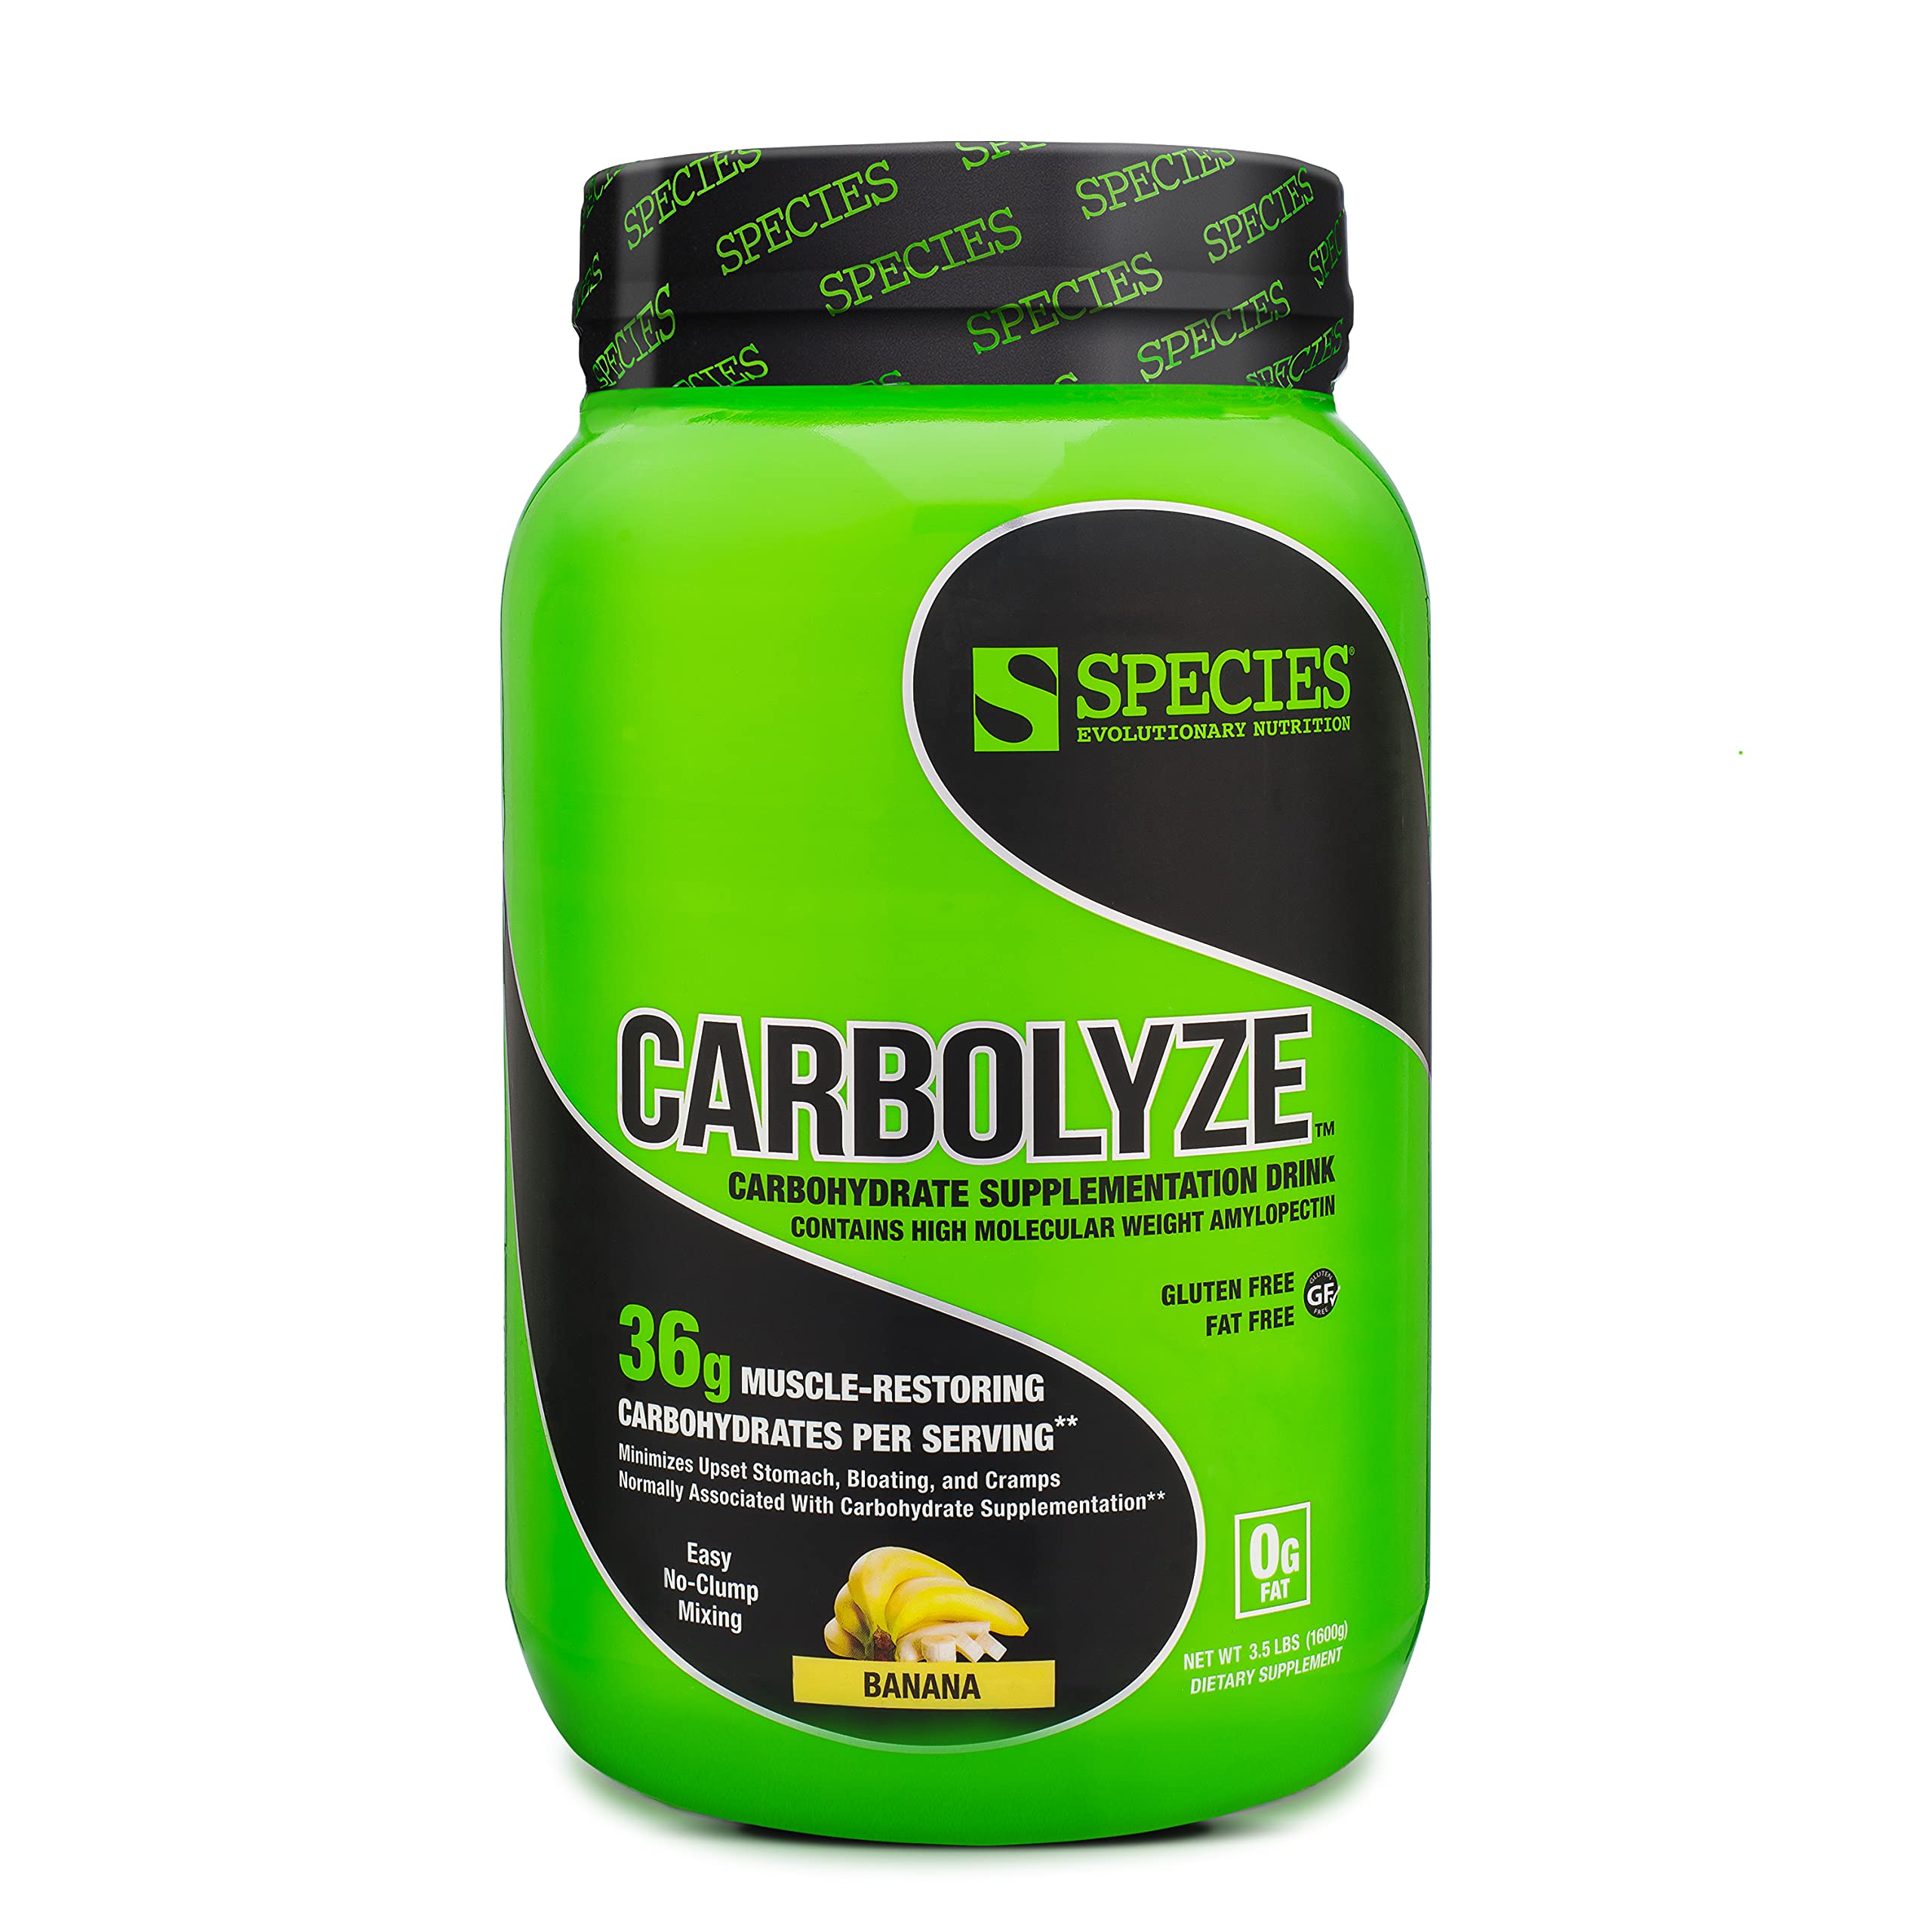 Species Nutrition Carbolyze Carbohydrate Powder Supplement, No Bloating or Cramping, High Molecular Weight Micronized Carb Powder Intra & Post Workout. Sugar Free. (Banana, 40 Servings)